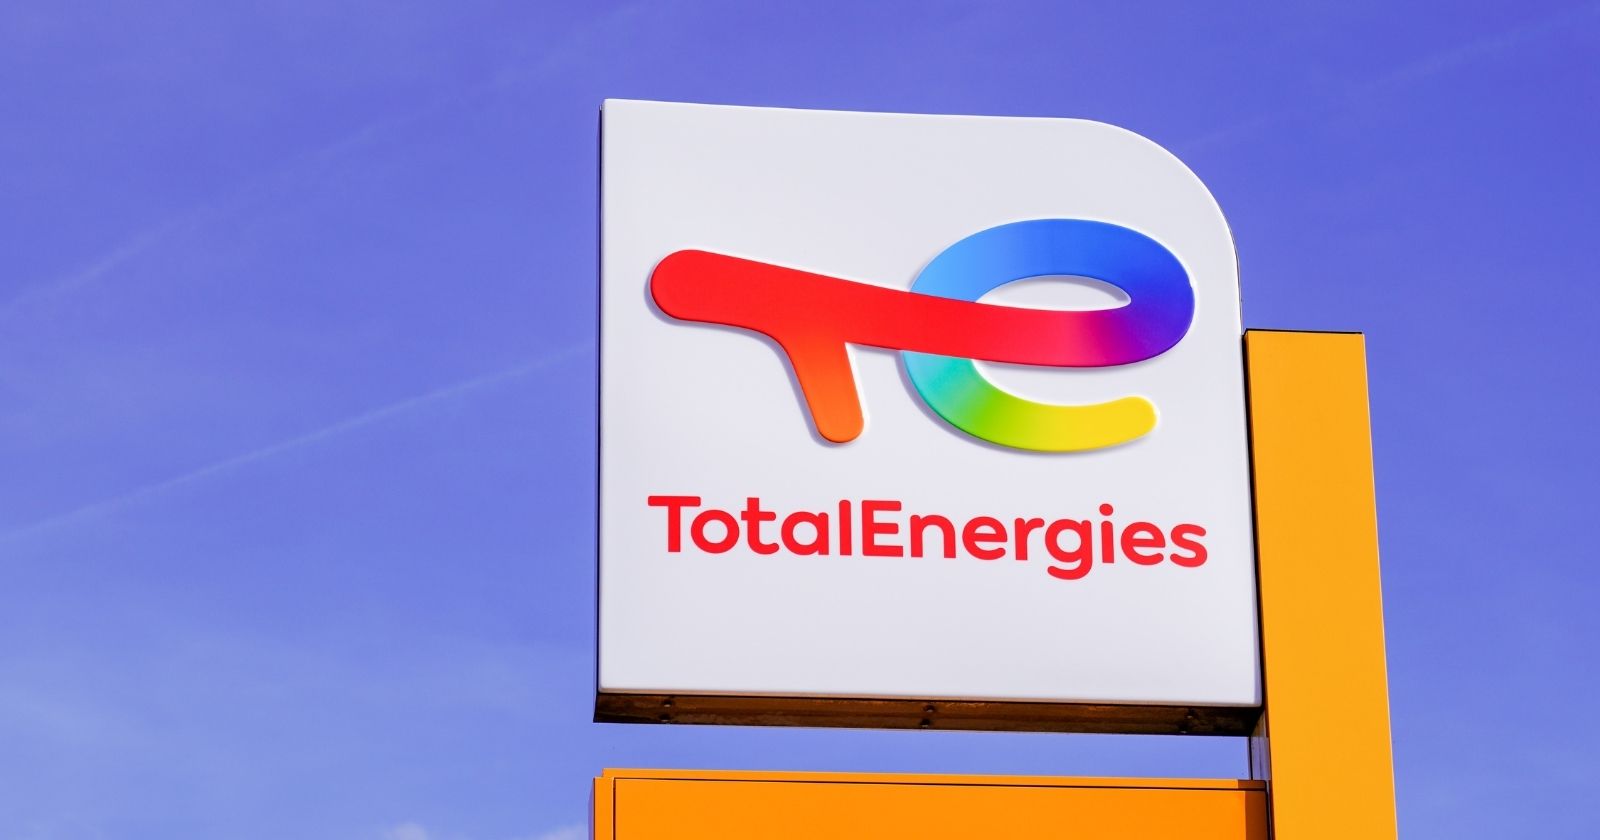 TotalEnergies announces a “gas check” of 100 euros for its customers “in energy poverty”